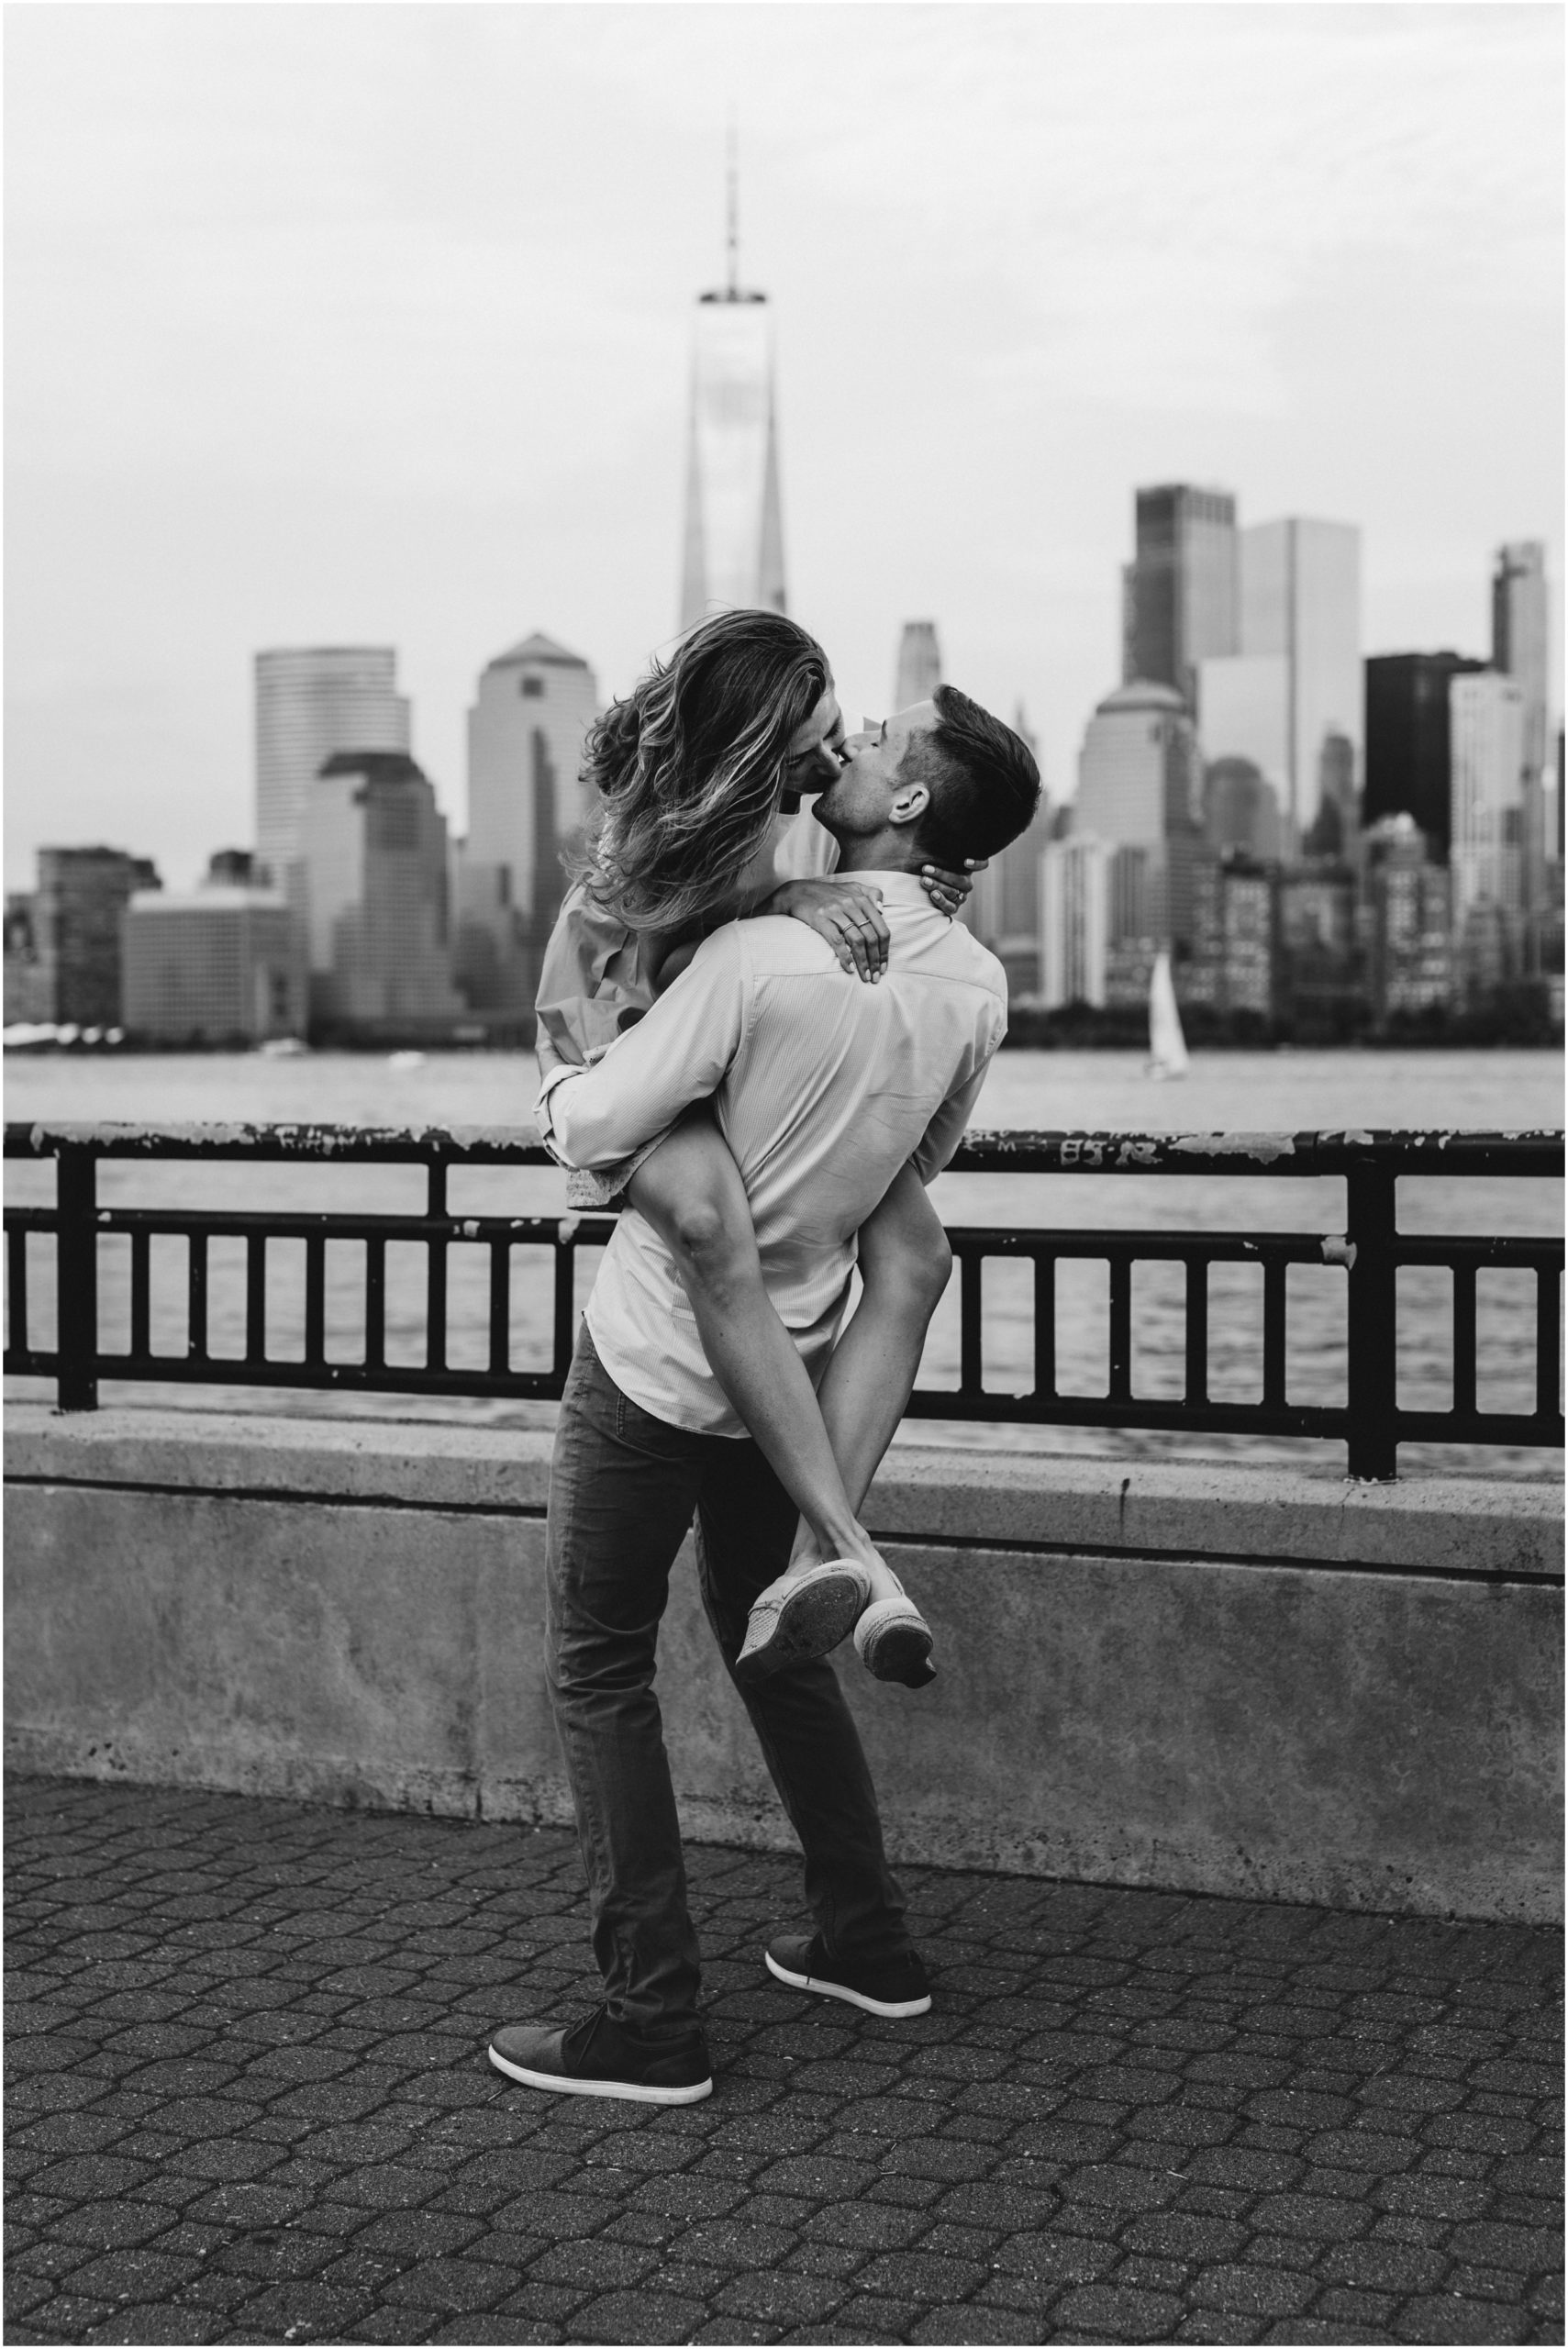 black and white image of girl jumping into guy's arms and kissing